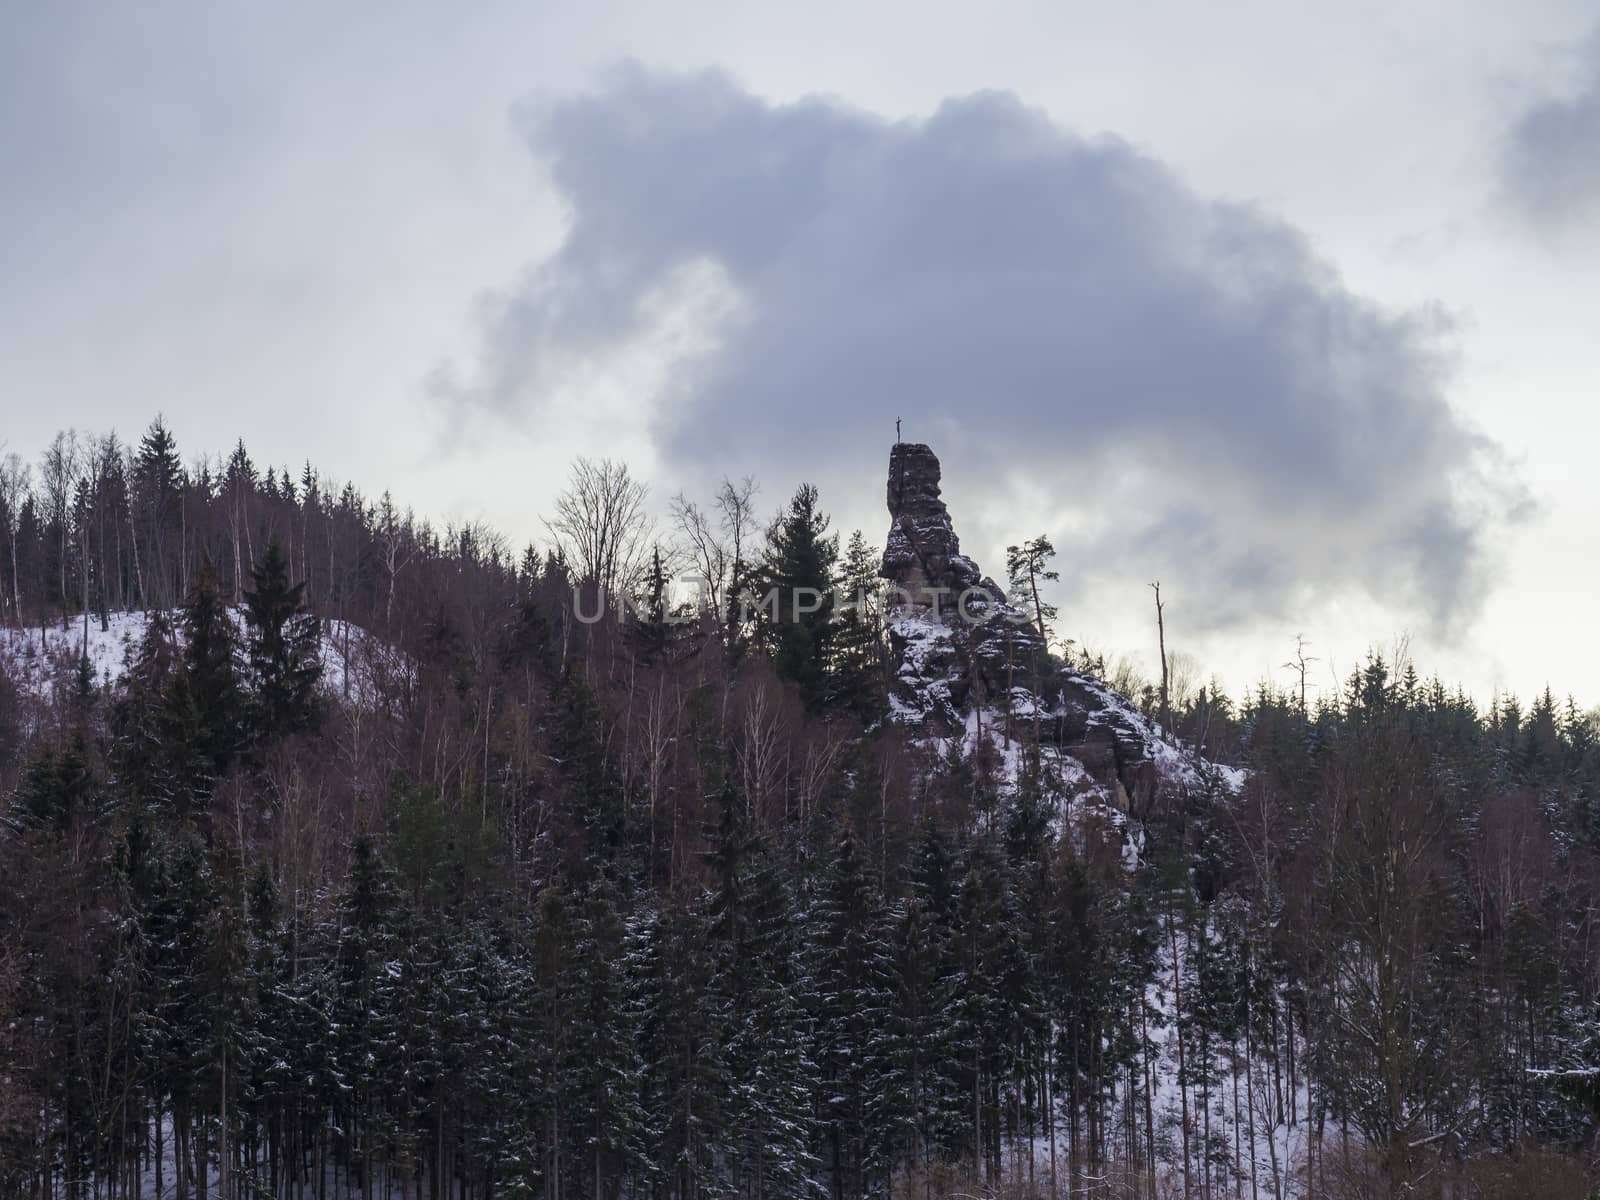 tall sandstone rock with cross and crucifix in snow covered forest landscape with snowy spruce trees and hill, idyllic winter landscape in dusk, blue hour.